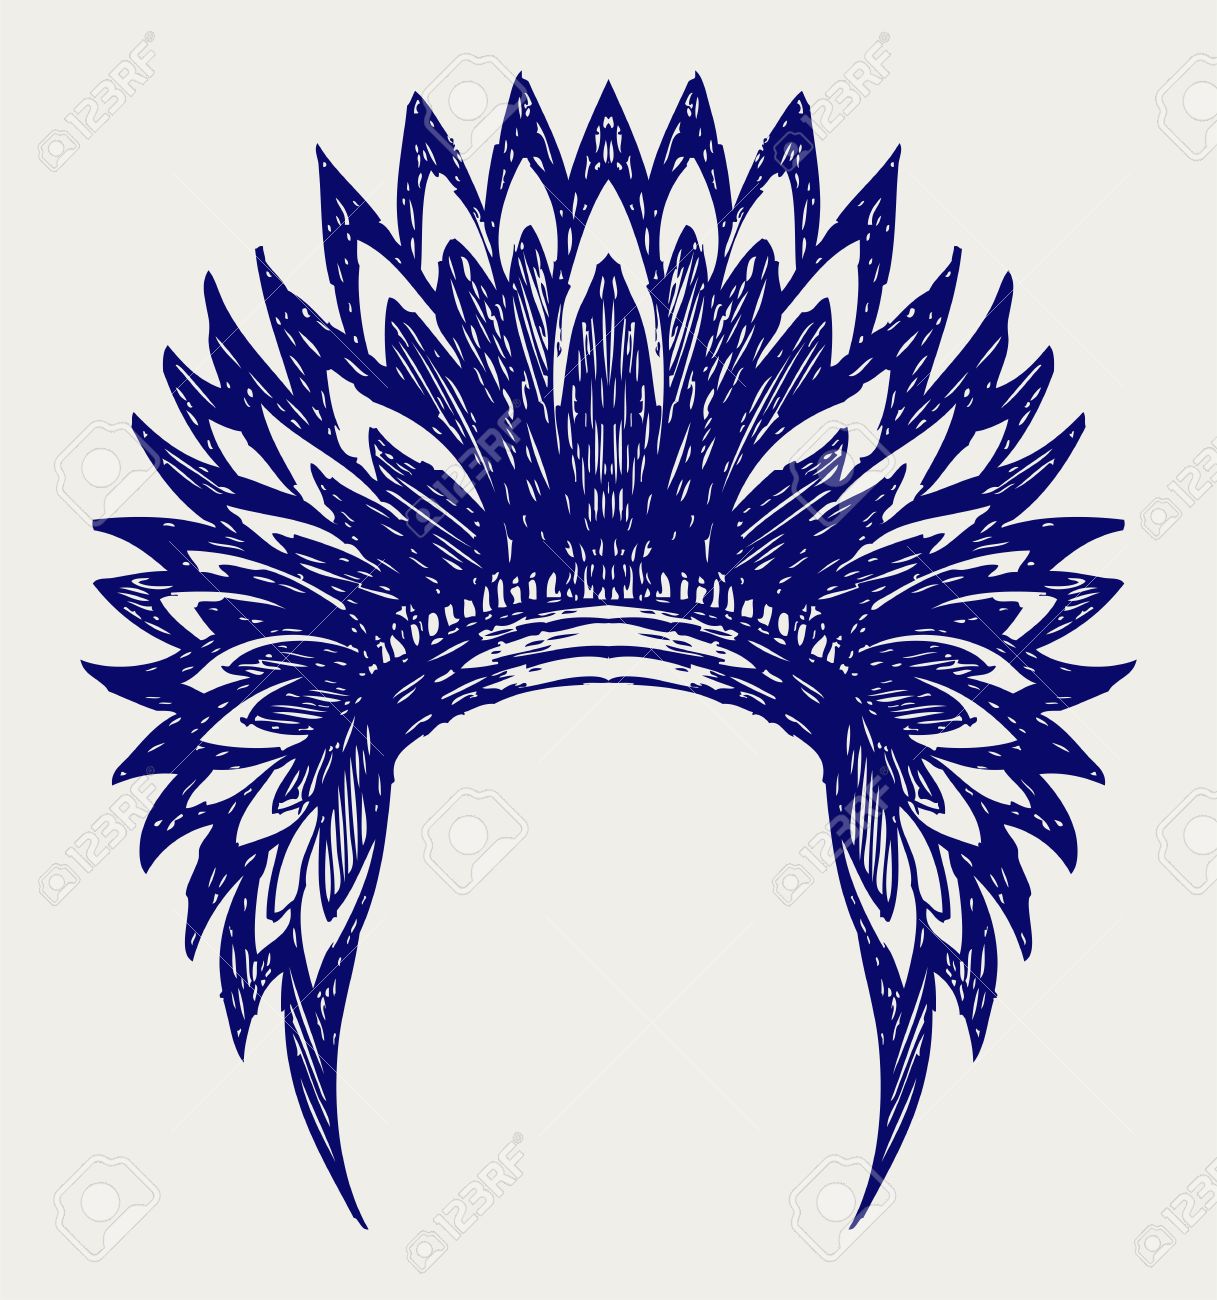 Headdress clipart #12, Download drawings